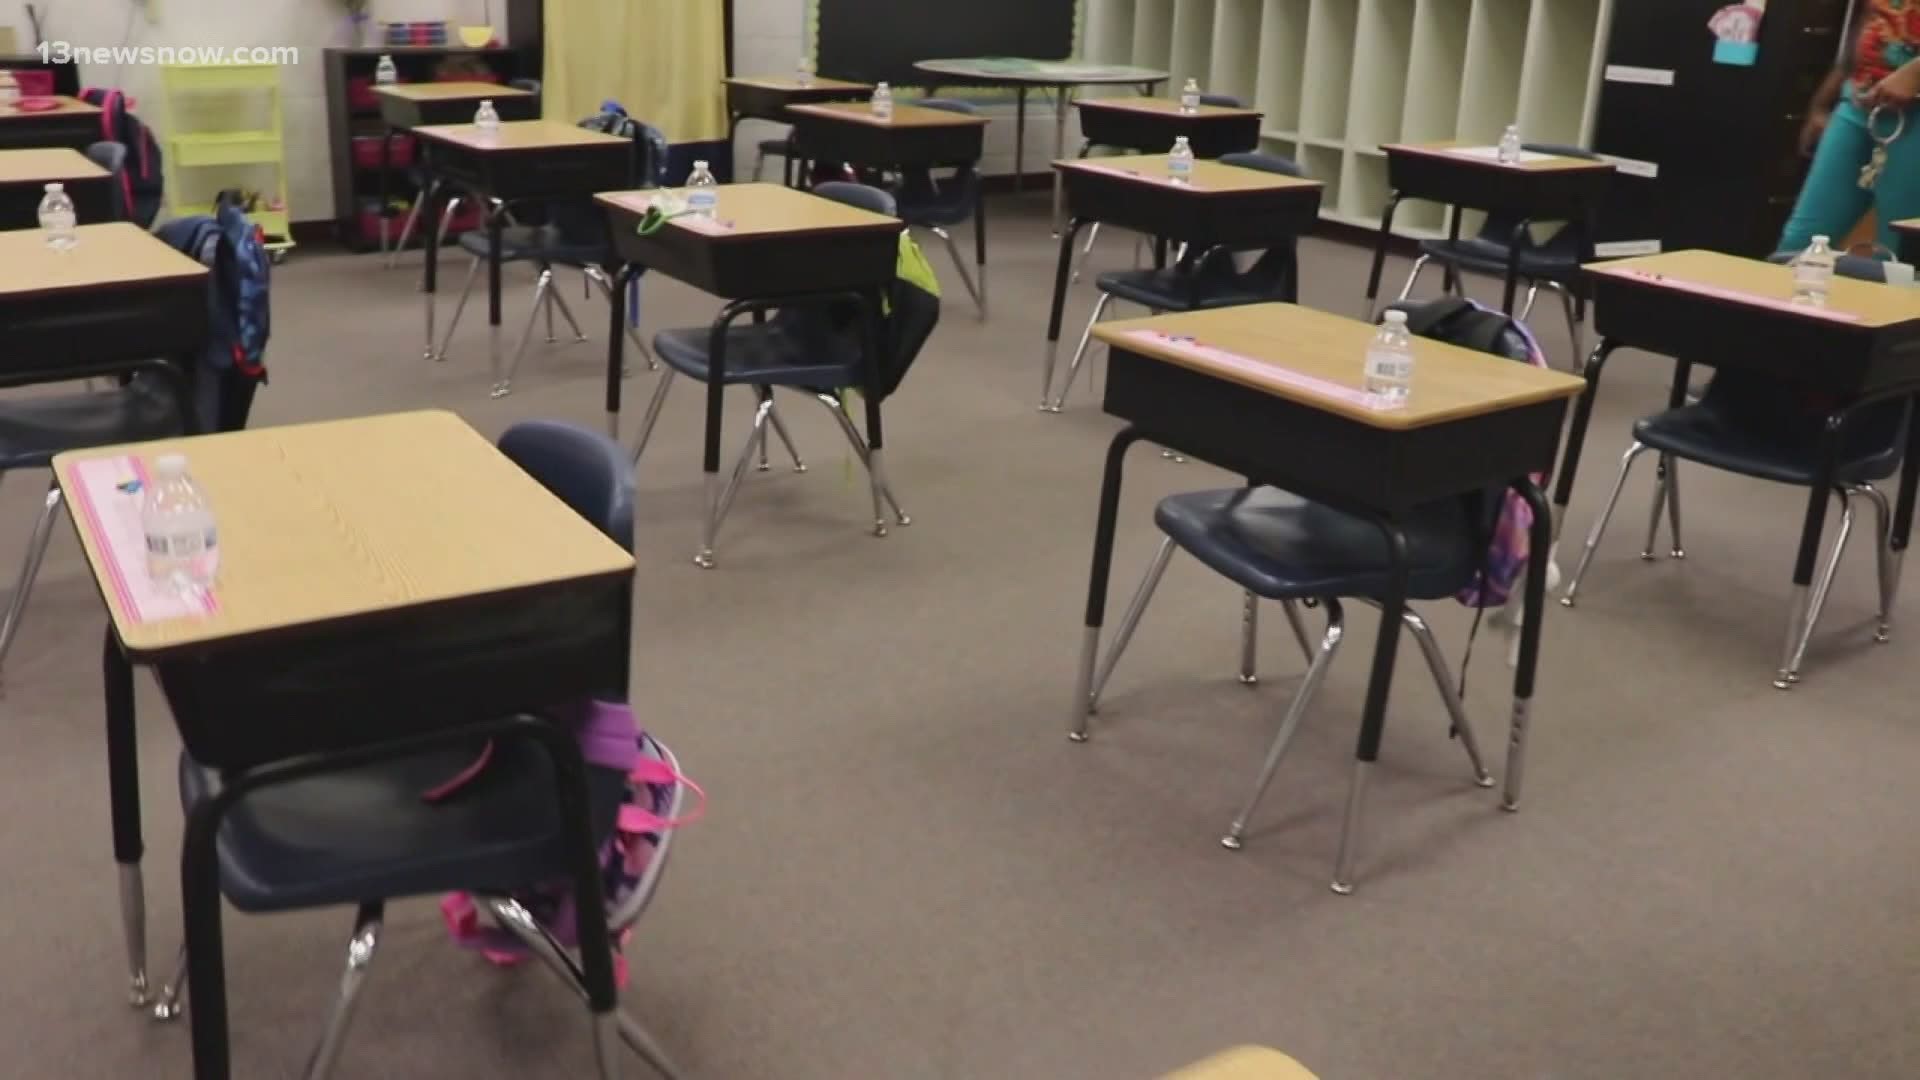 Division officials will start phasing students back inside the classroom on March 15, almost a year to the date after they were sent home.